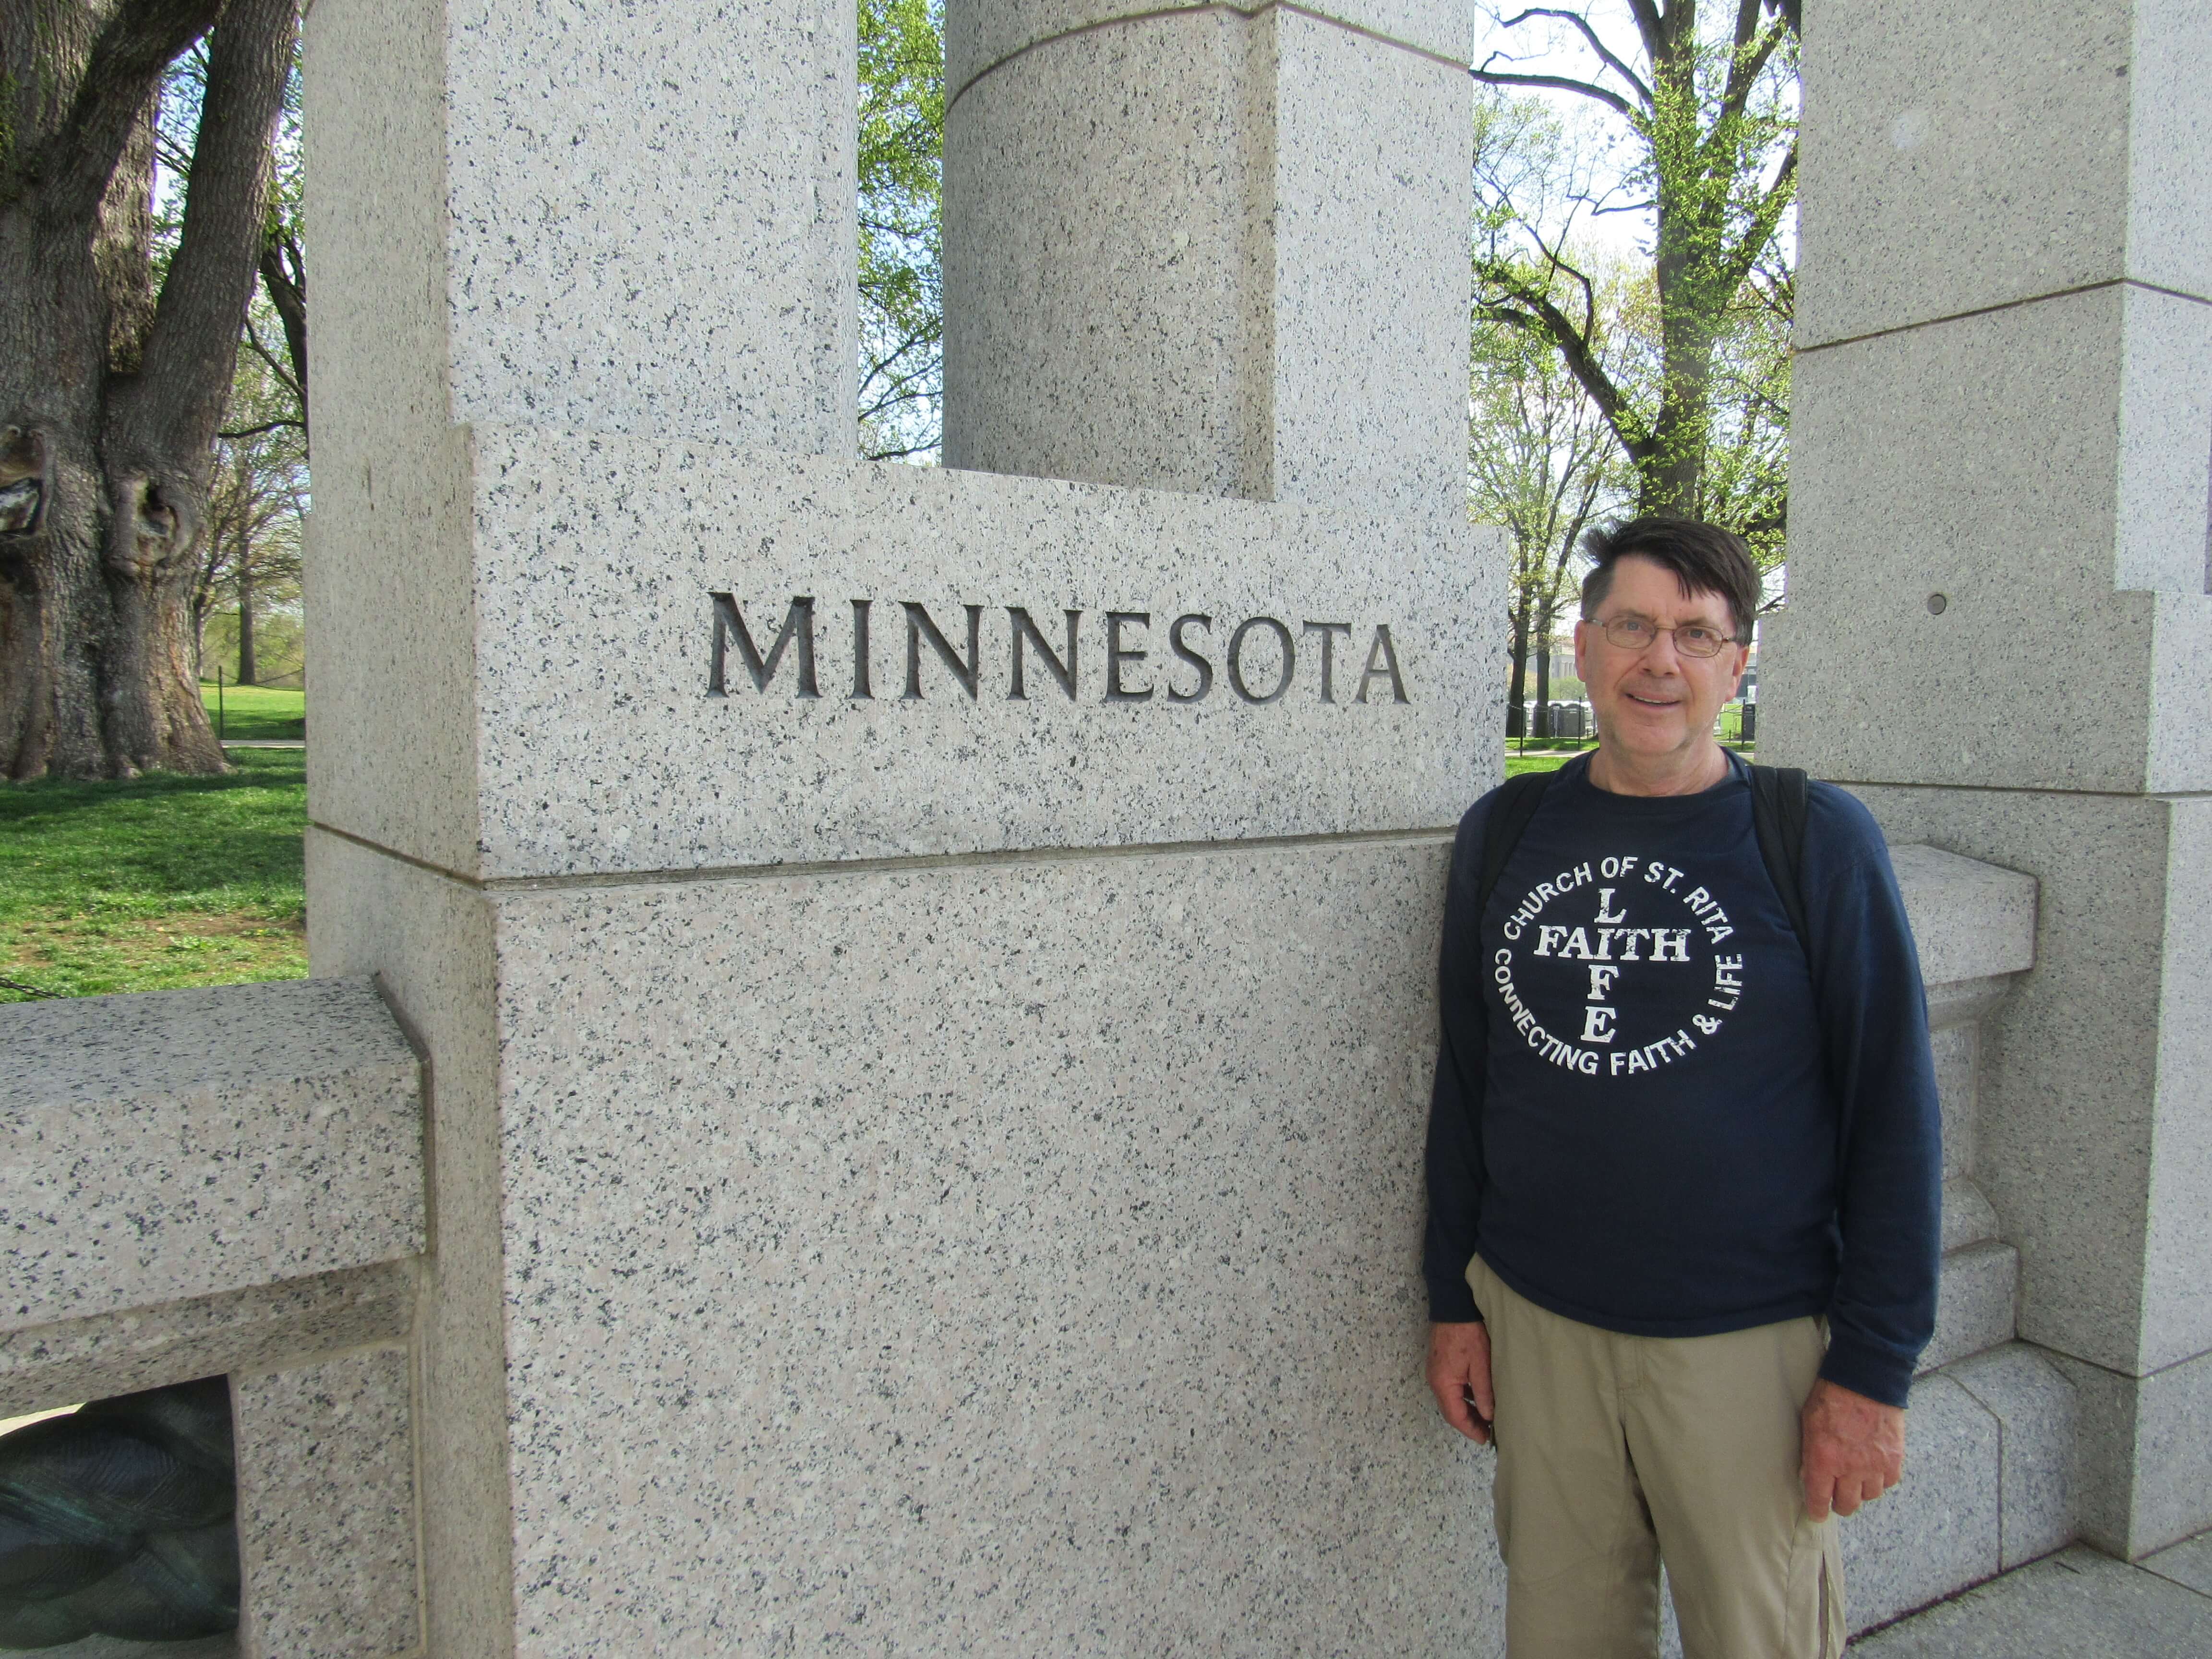 Contemporary photo of an older man at a granite memorial or building that has "Minnesota" carved into it at head height.